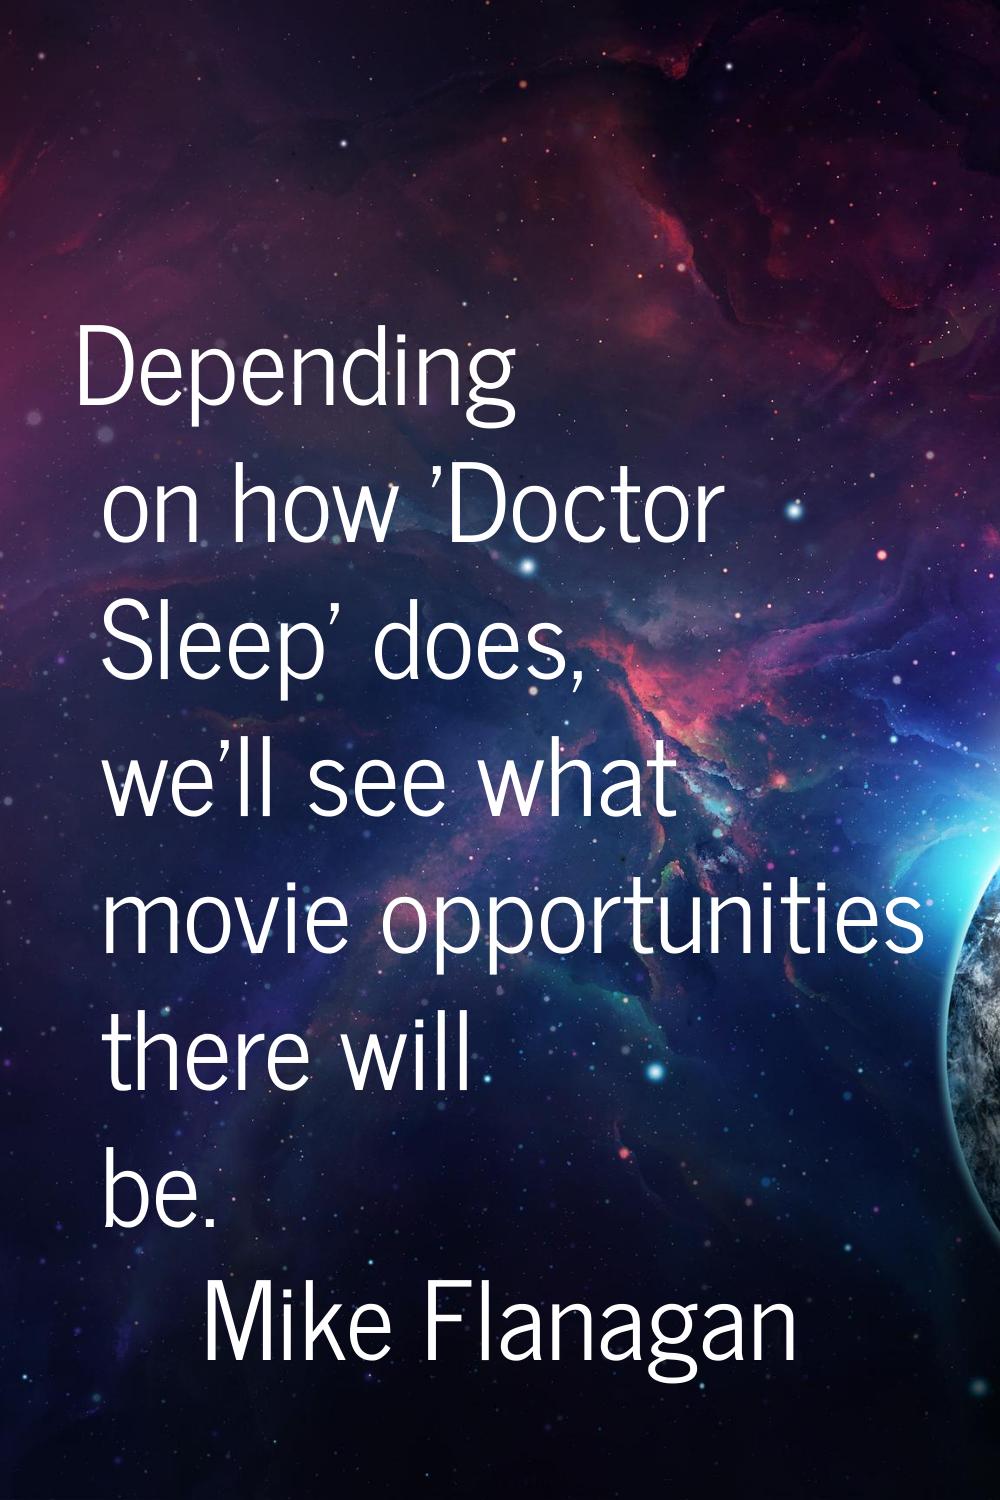 Depending on how 'Doctor Sleep' does, we'll see what movie opportunities there will be.